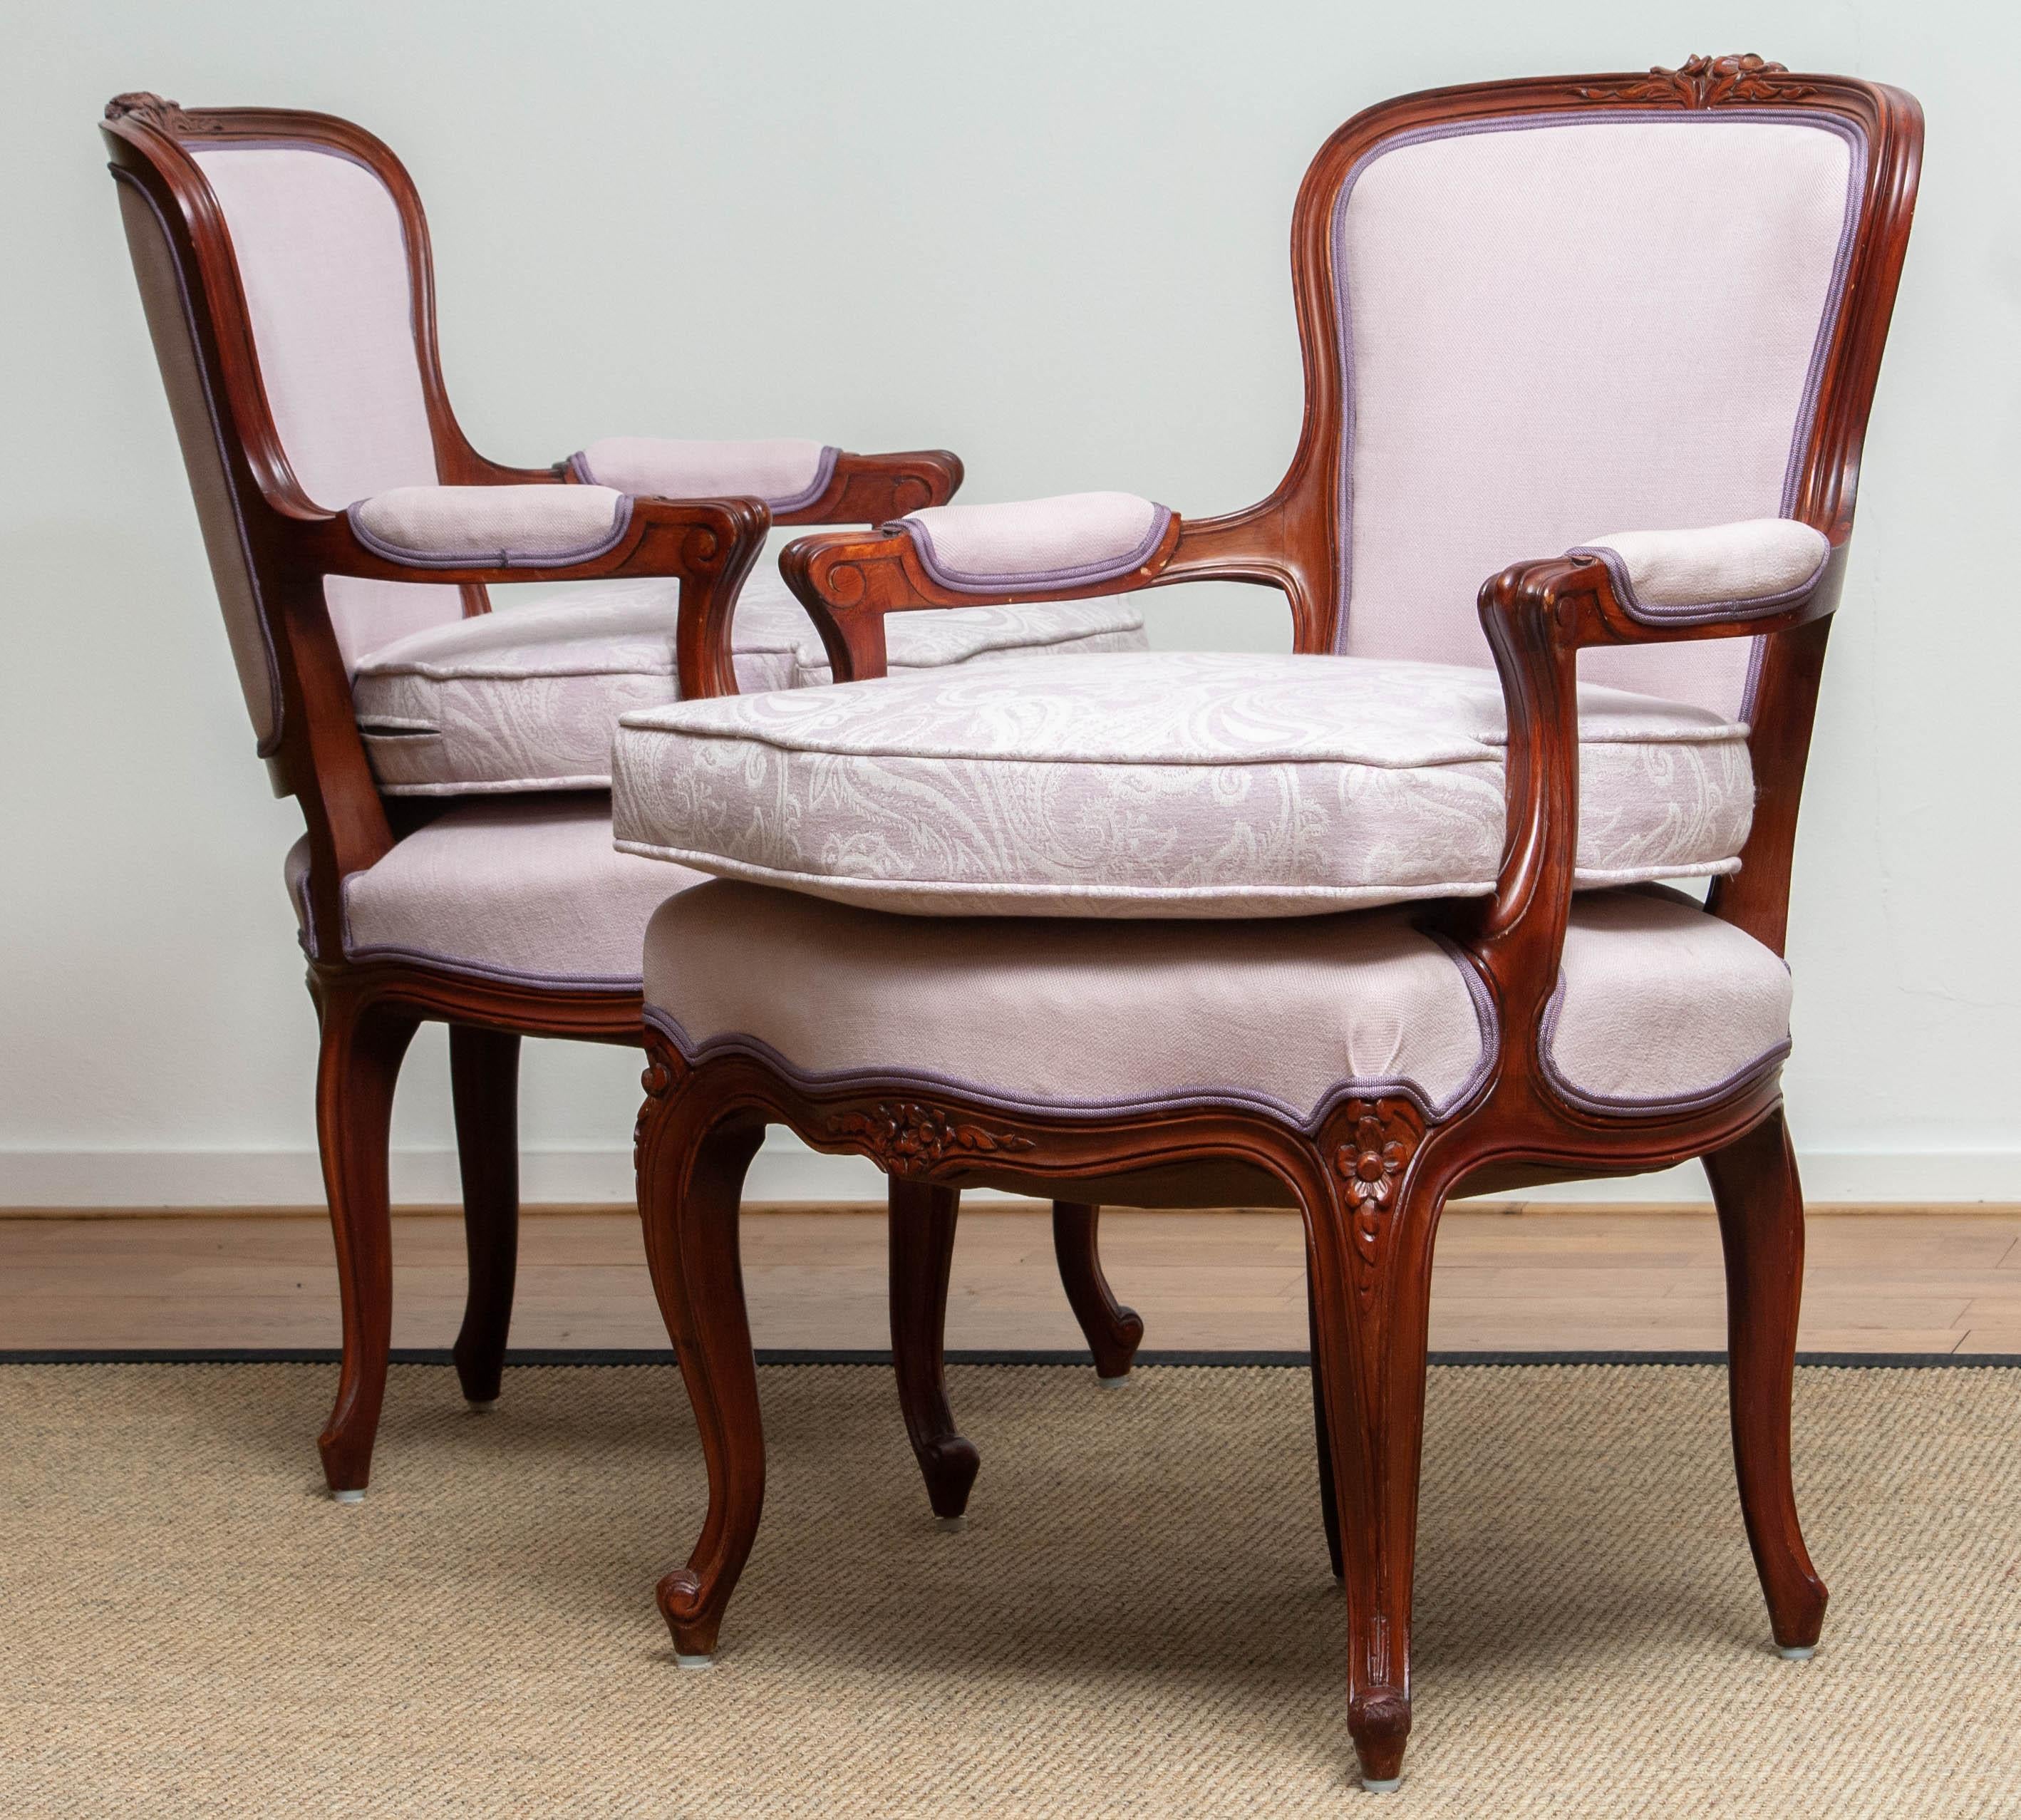 1950 Pair of Pink Swedish Rococo Bergères in the Shabby Chic Technique Chairs F In Good Condition In Silvolde, Gelderland